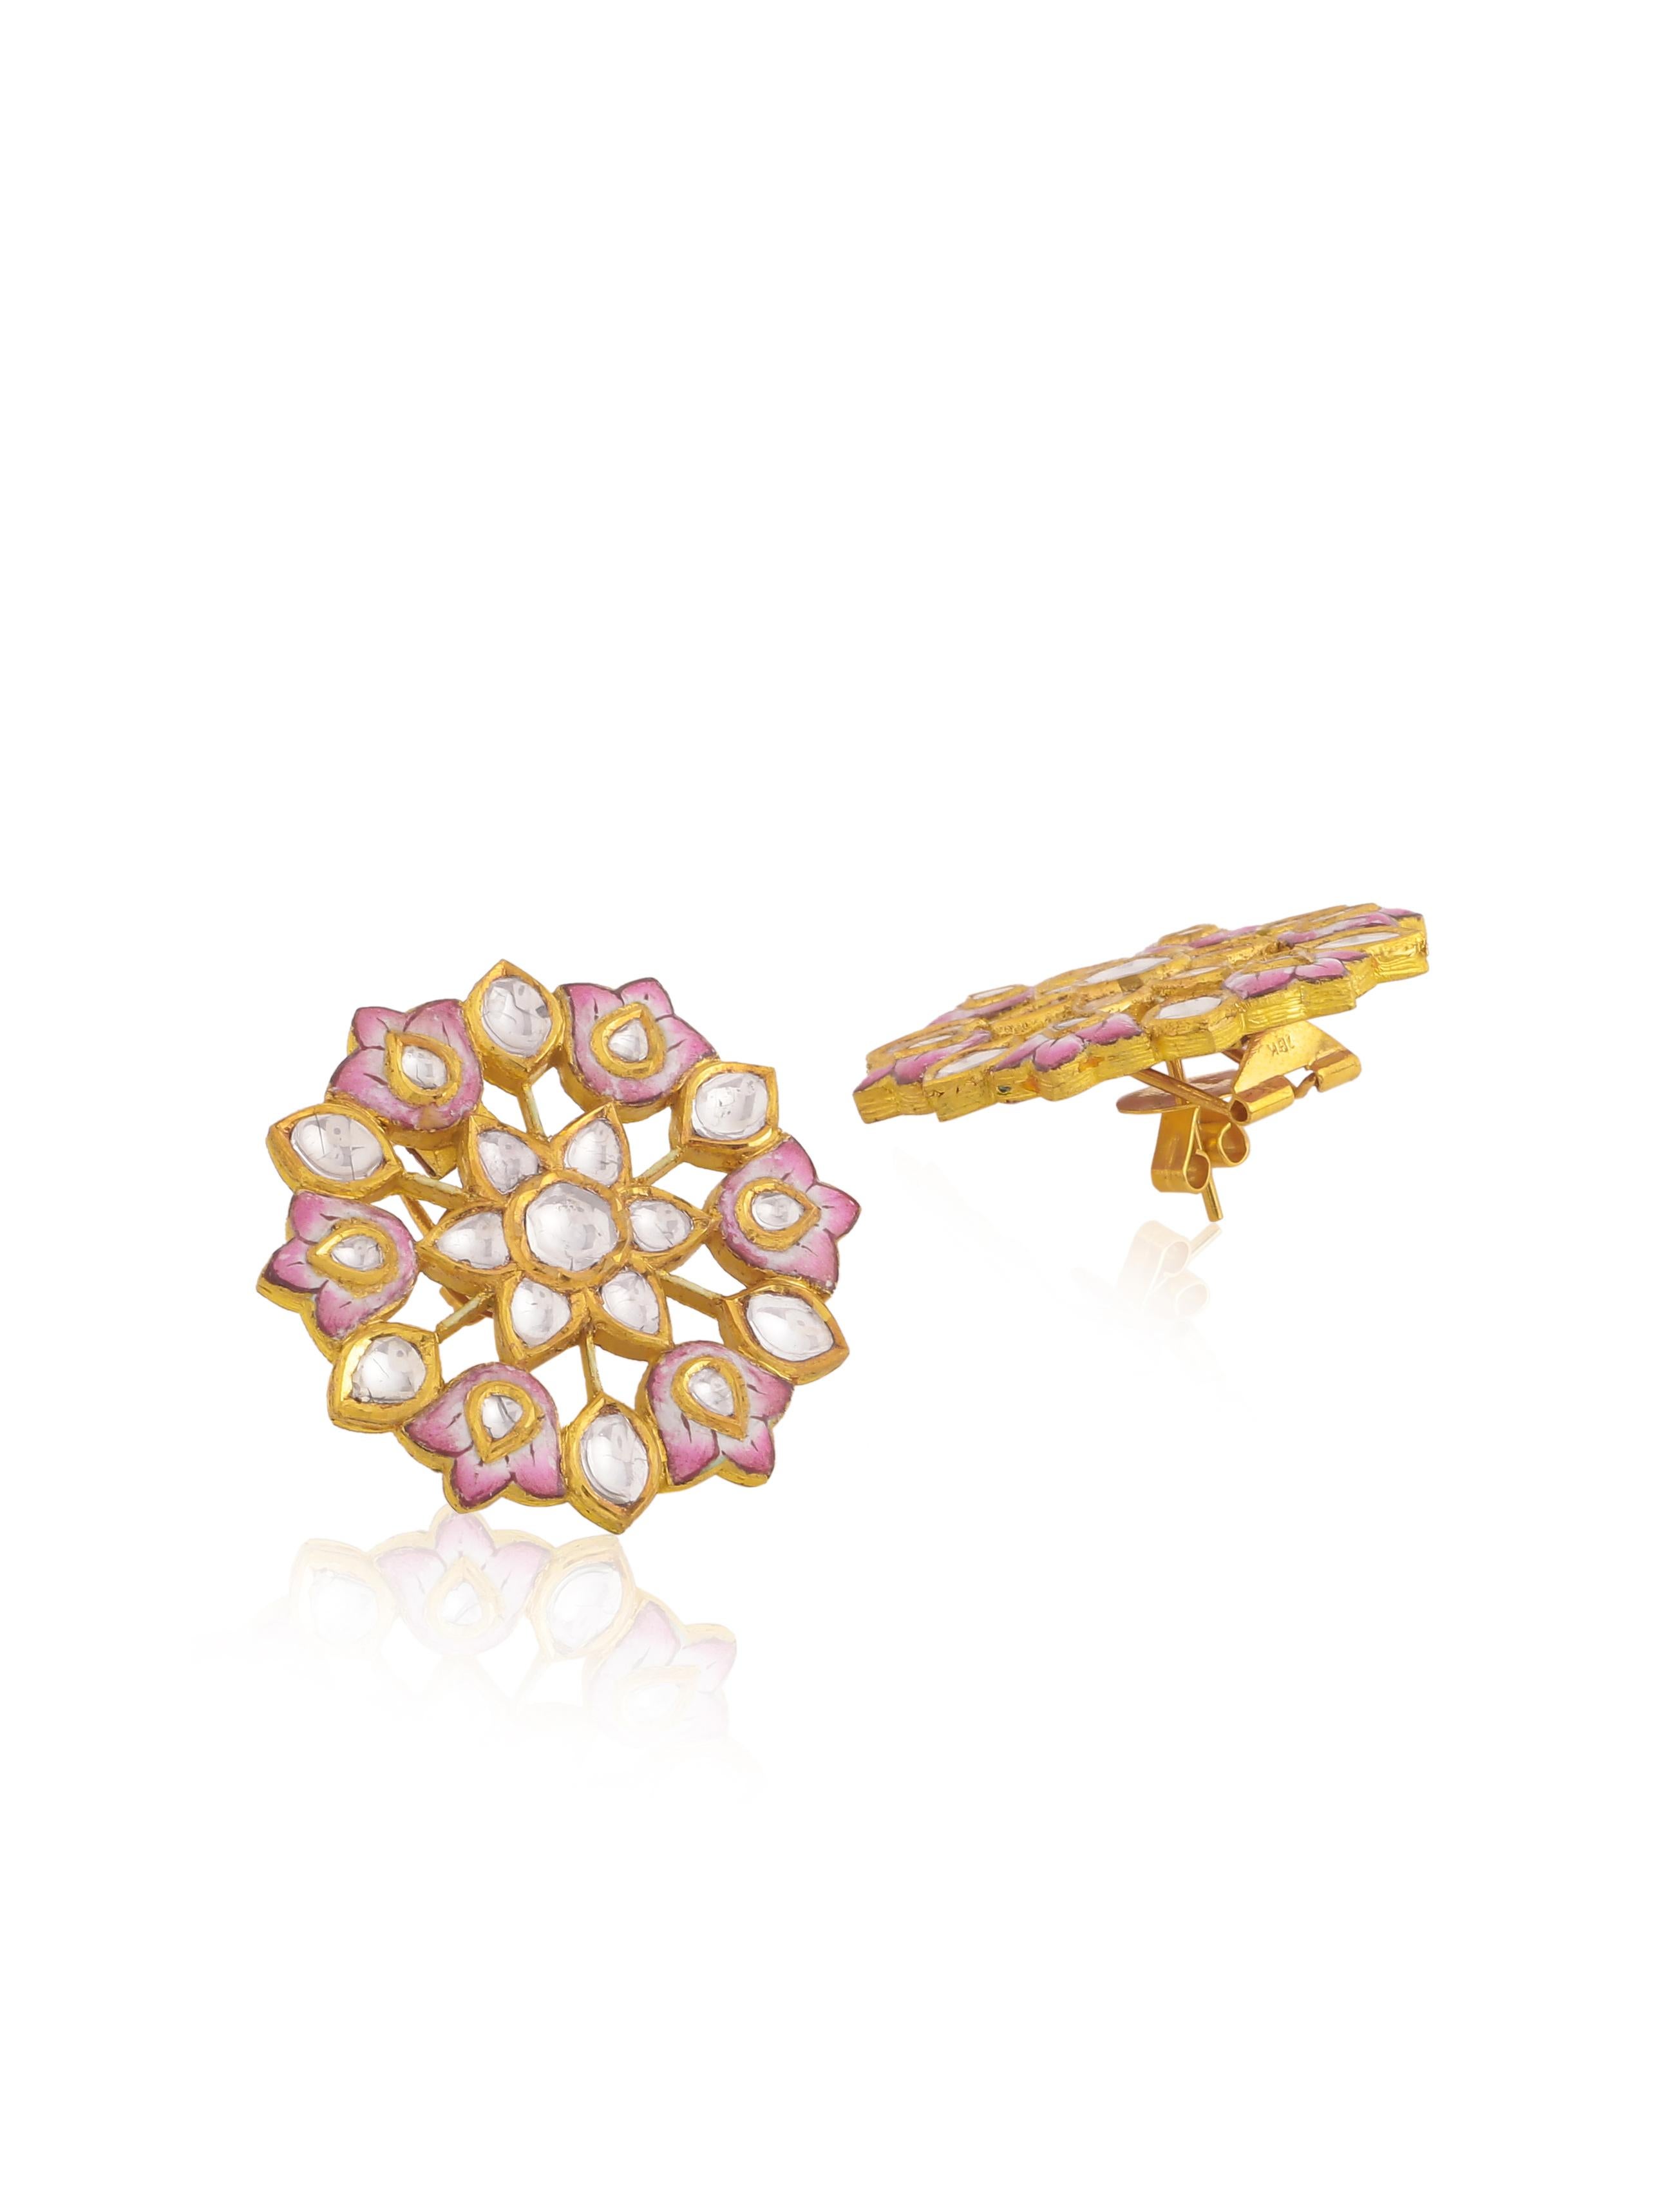 A pair of Diamond and pink enamel earrings studs pair. The earring has Enamel in a lotus flower motif. You will see flat diamonds in the earring, which are called 